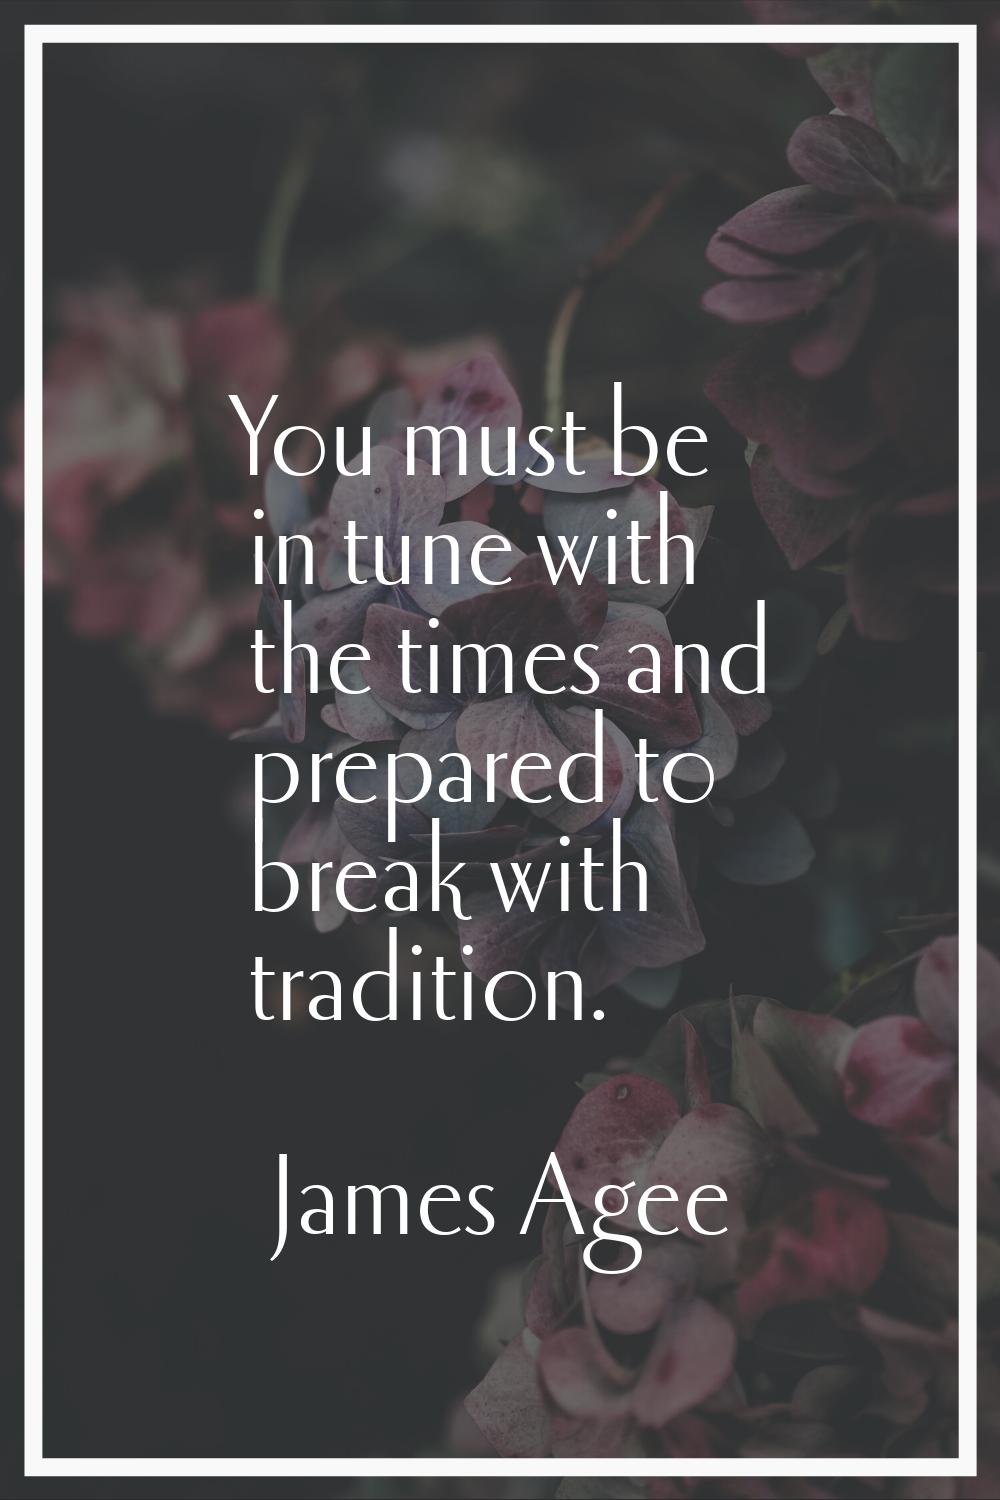 You must be in tune with the times and prepared to break with tradition.